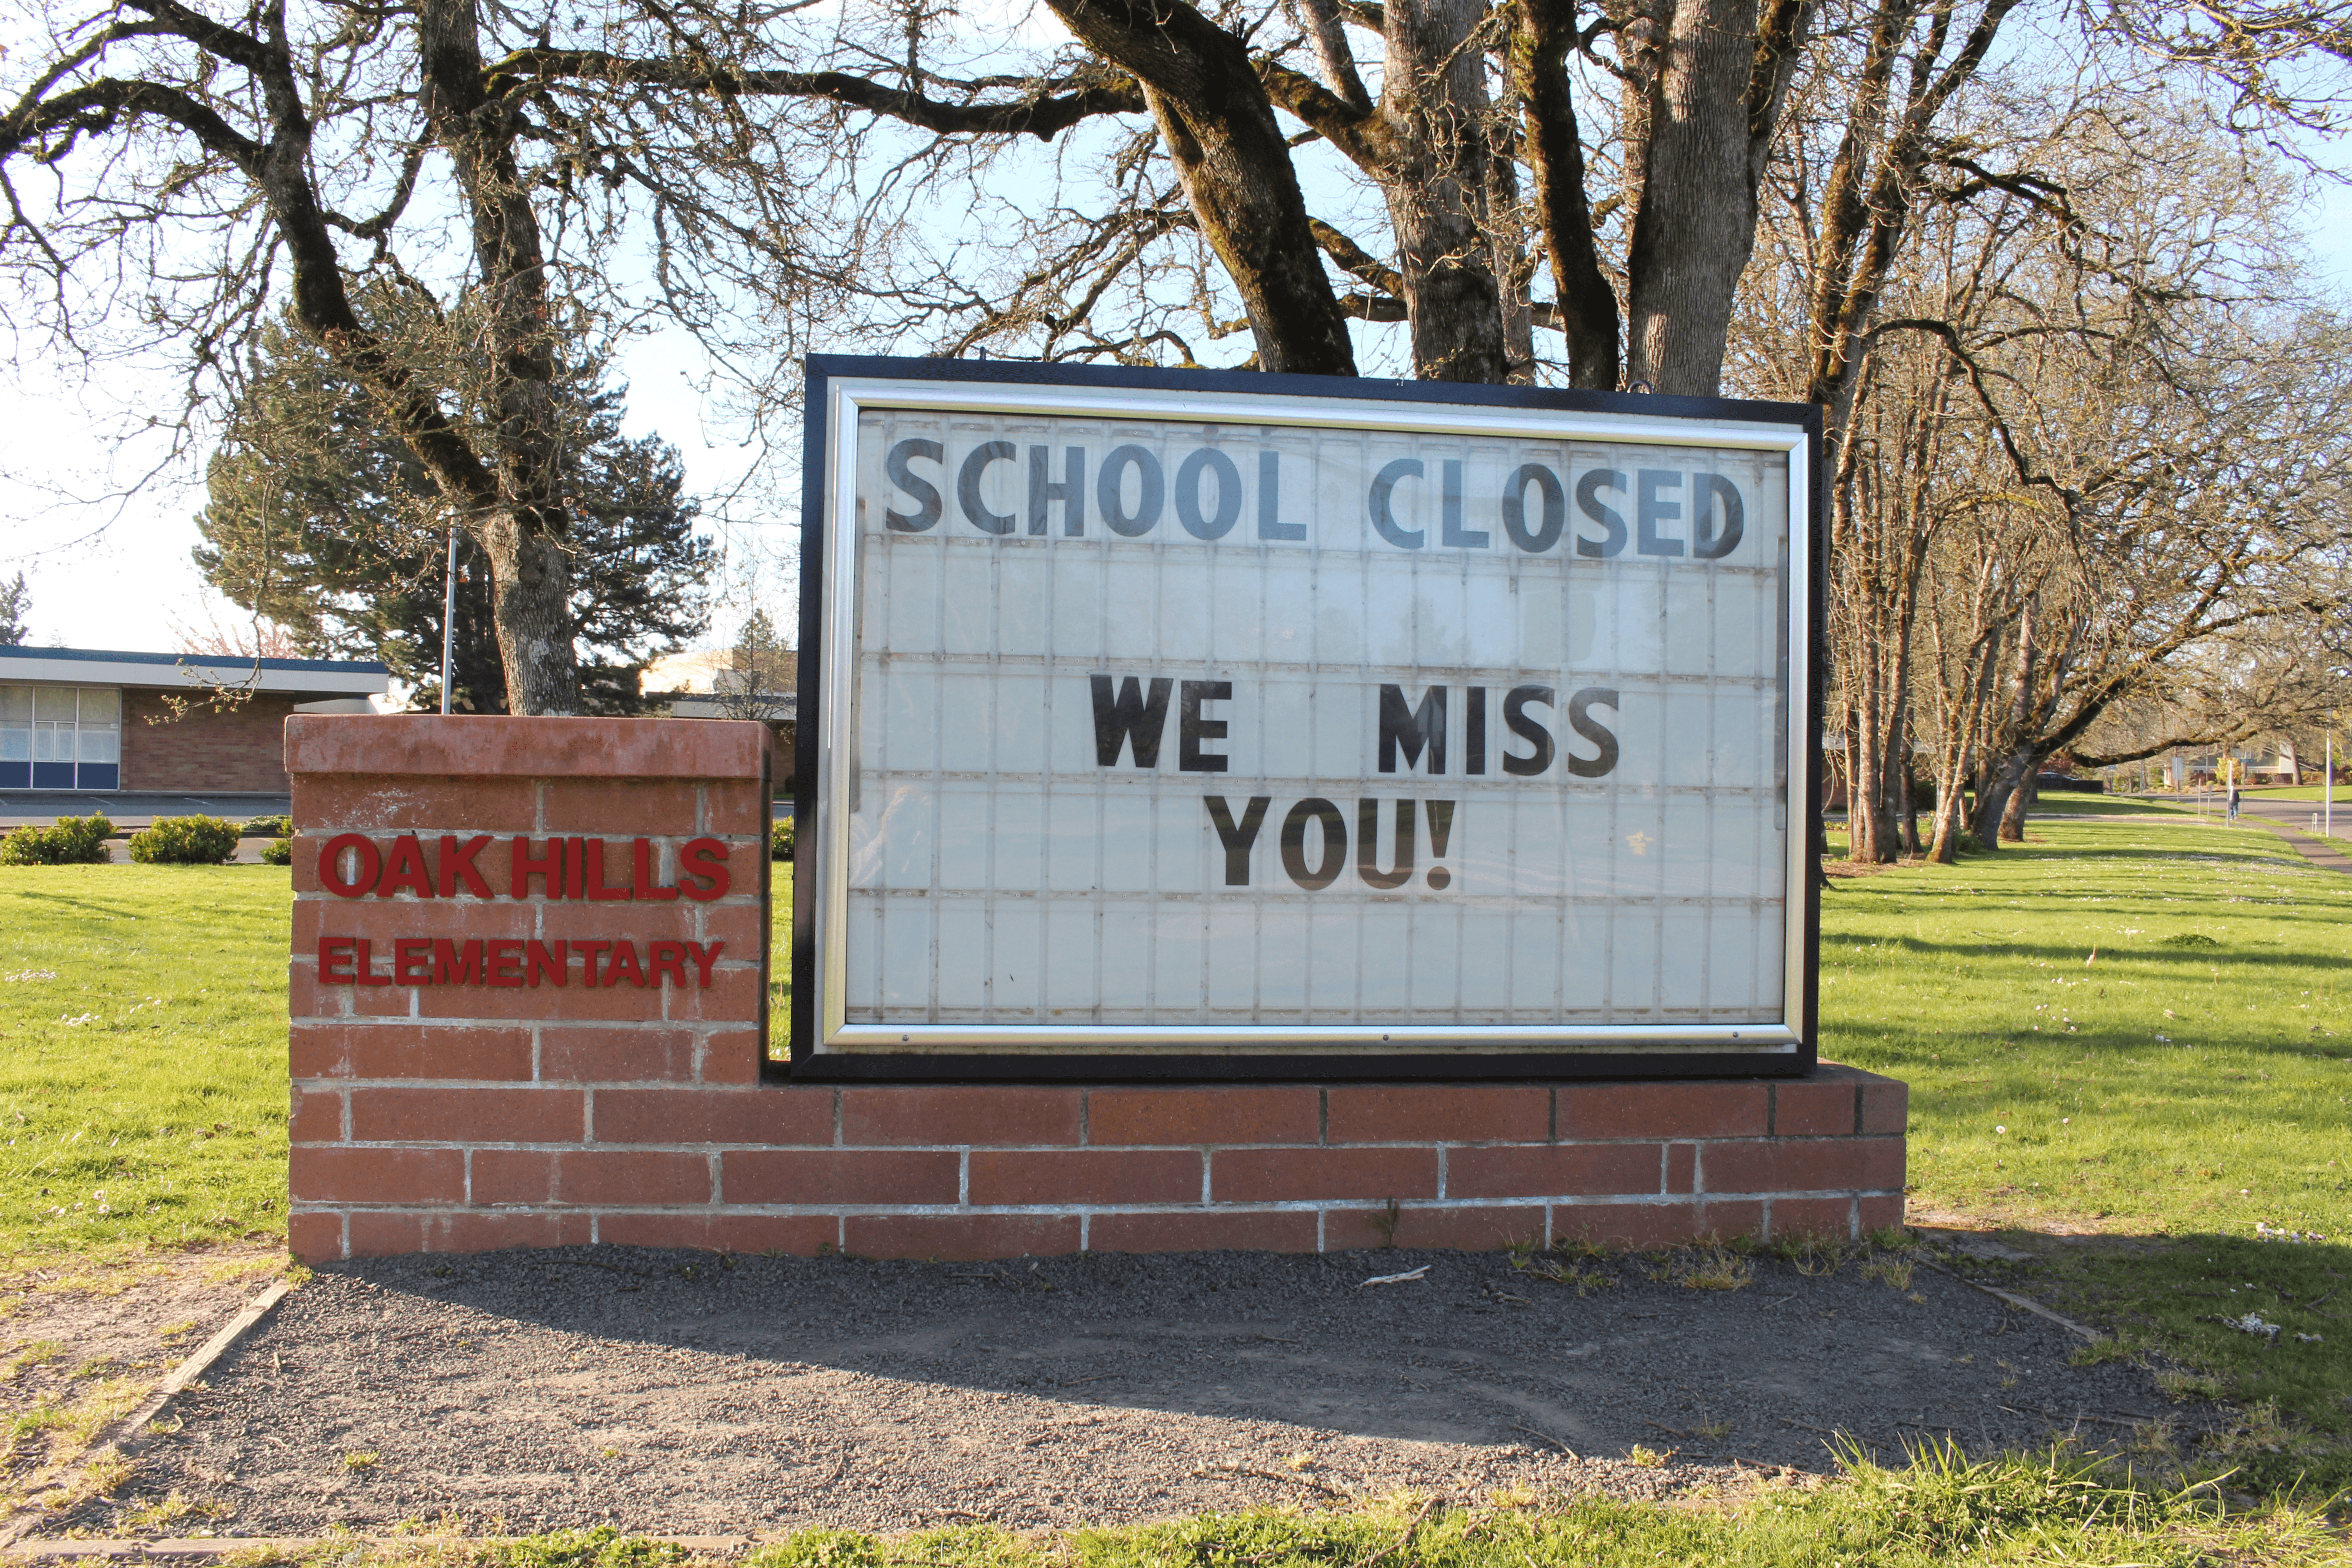 April 13, 2020 – On March 12, Governor Kate Brown of Oregon ordered all K–12 schools close statewide. They have not opened back up. Image by Sarah Fahmy. United States, 2020.